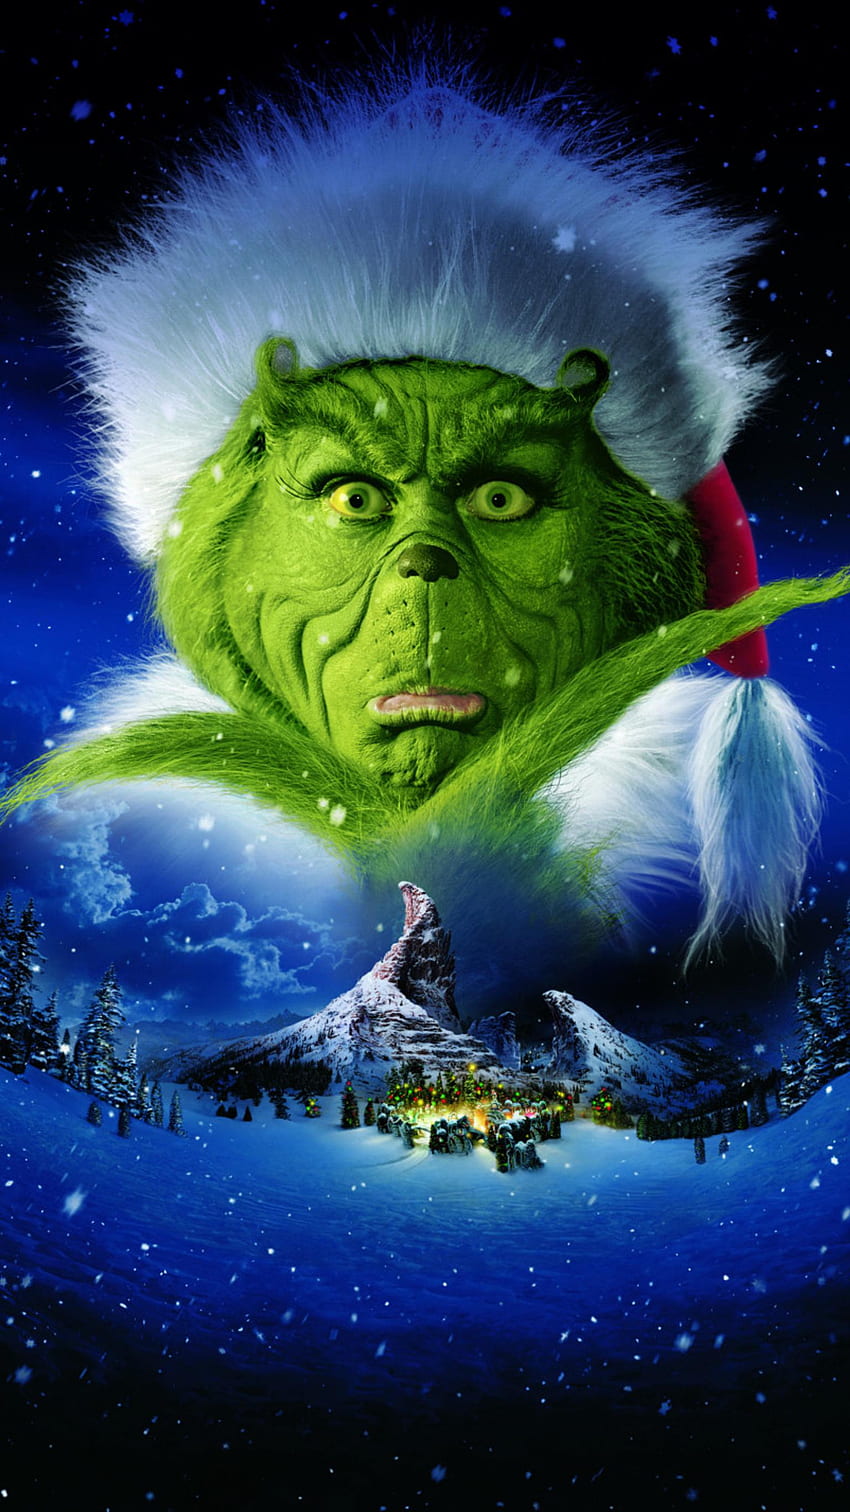 How the Grinch Stole Christmas (2022) movie HD phone wallpaper